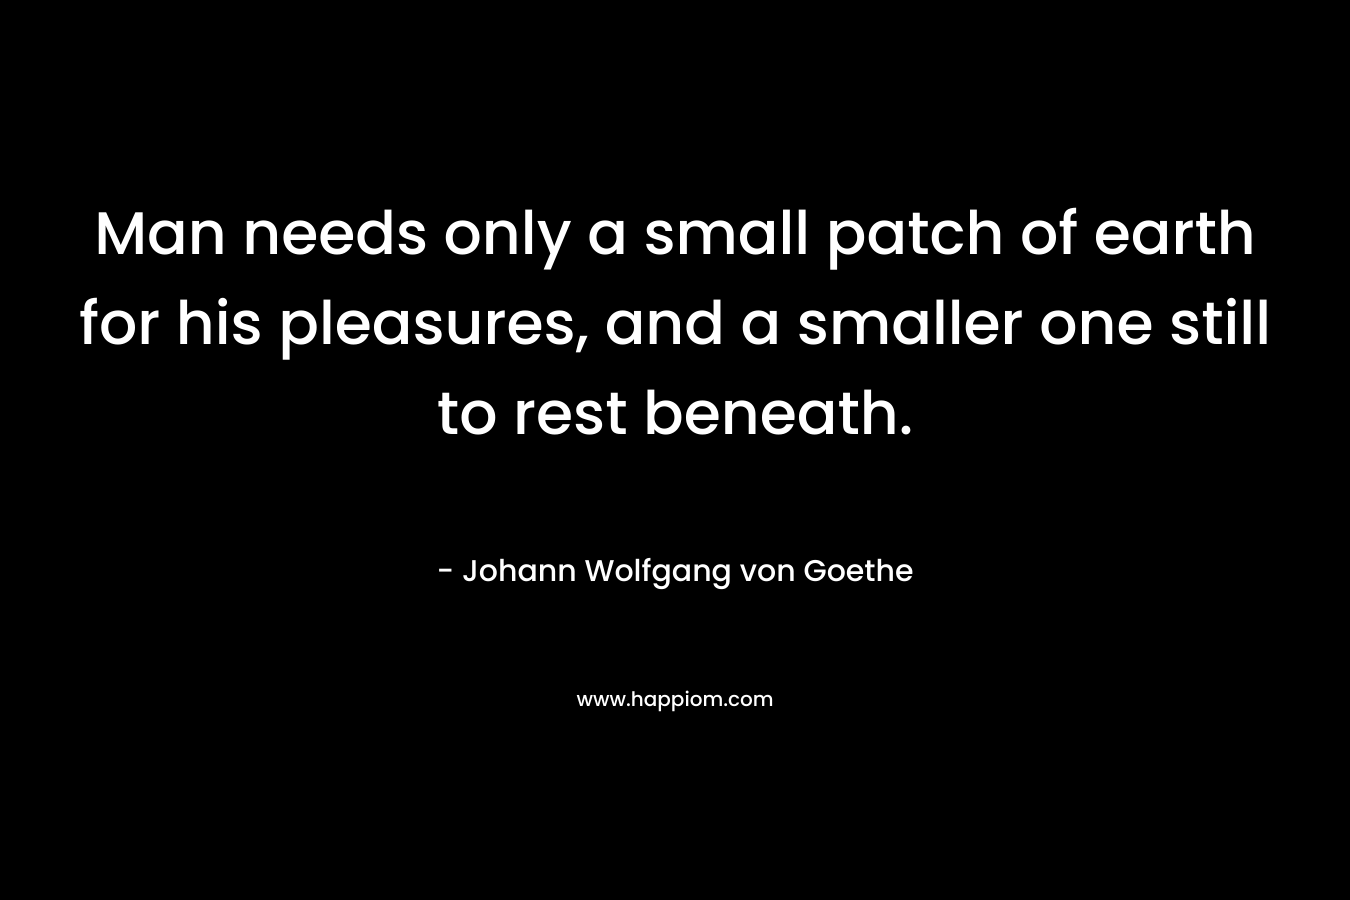 Man needs only a small patch of earth for his pleasures, and a smaller one still to rest beneath.